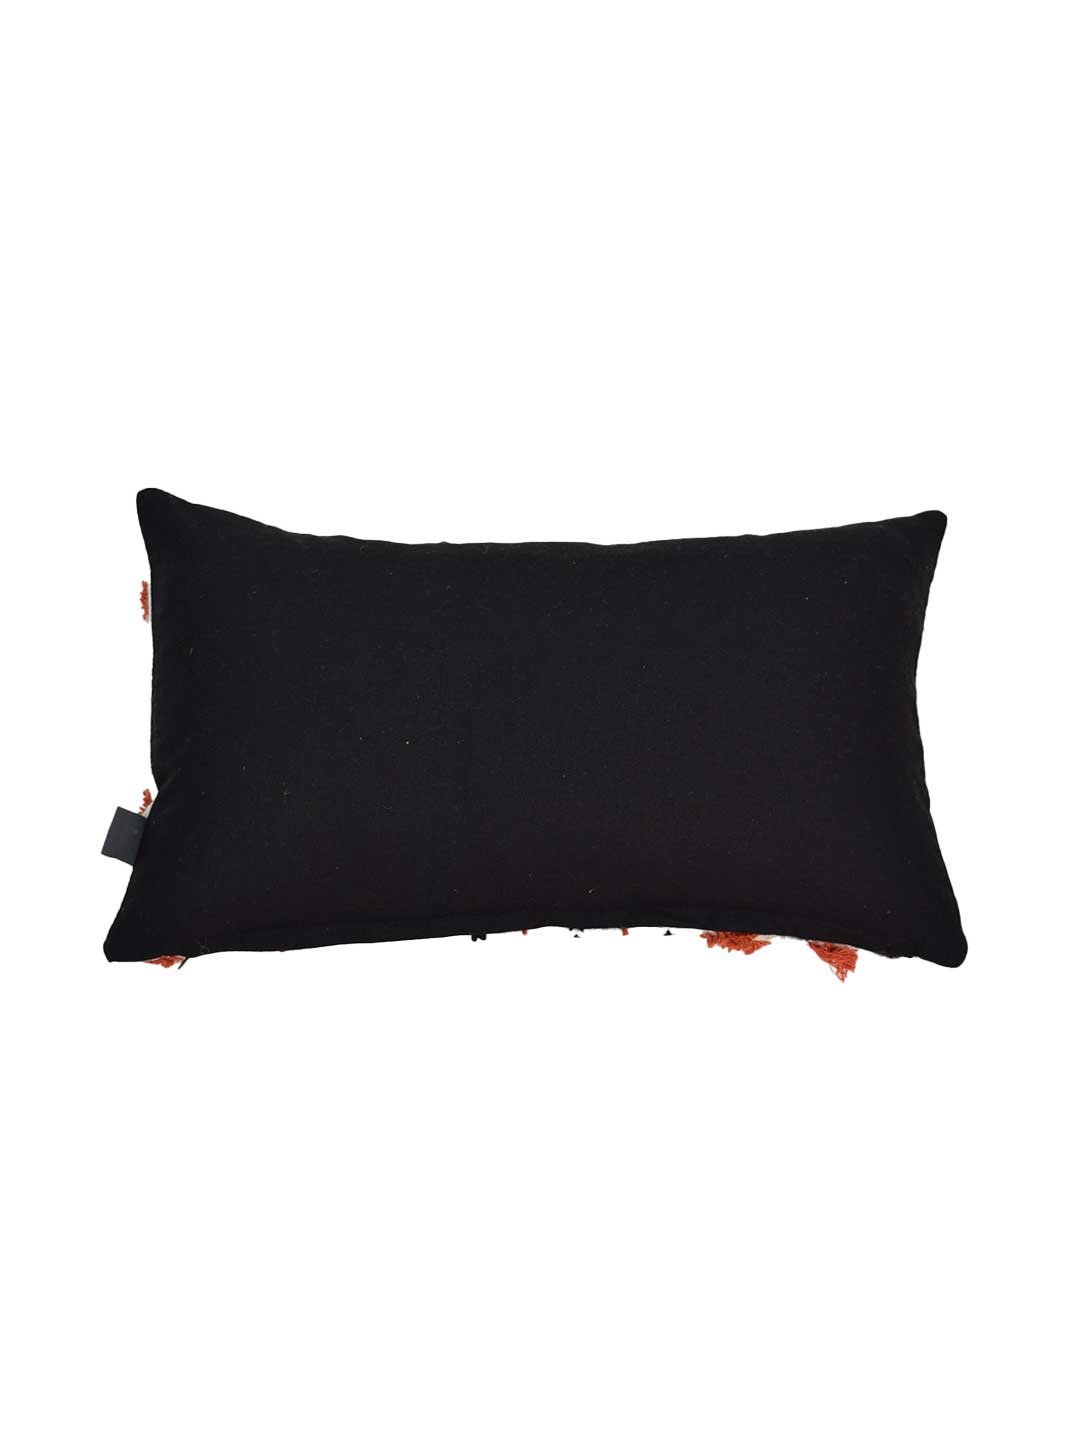 Blanc9 Tribal Vibes Cushion Cover with Filler 30x50cm